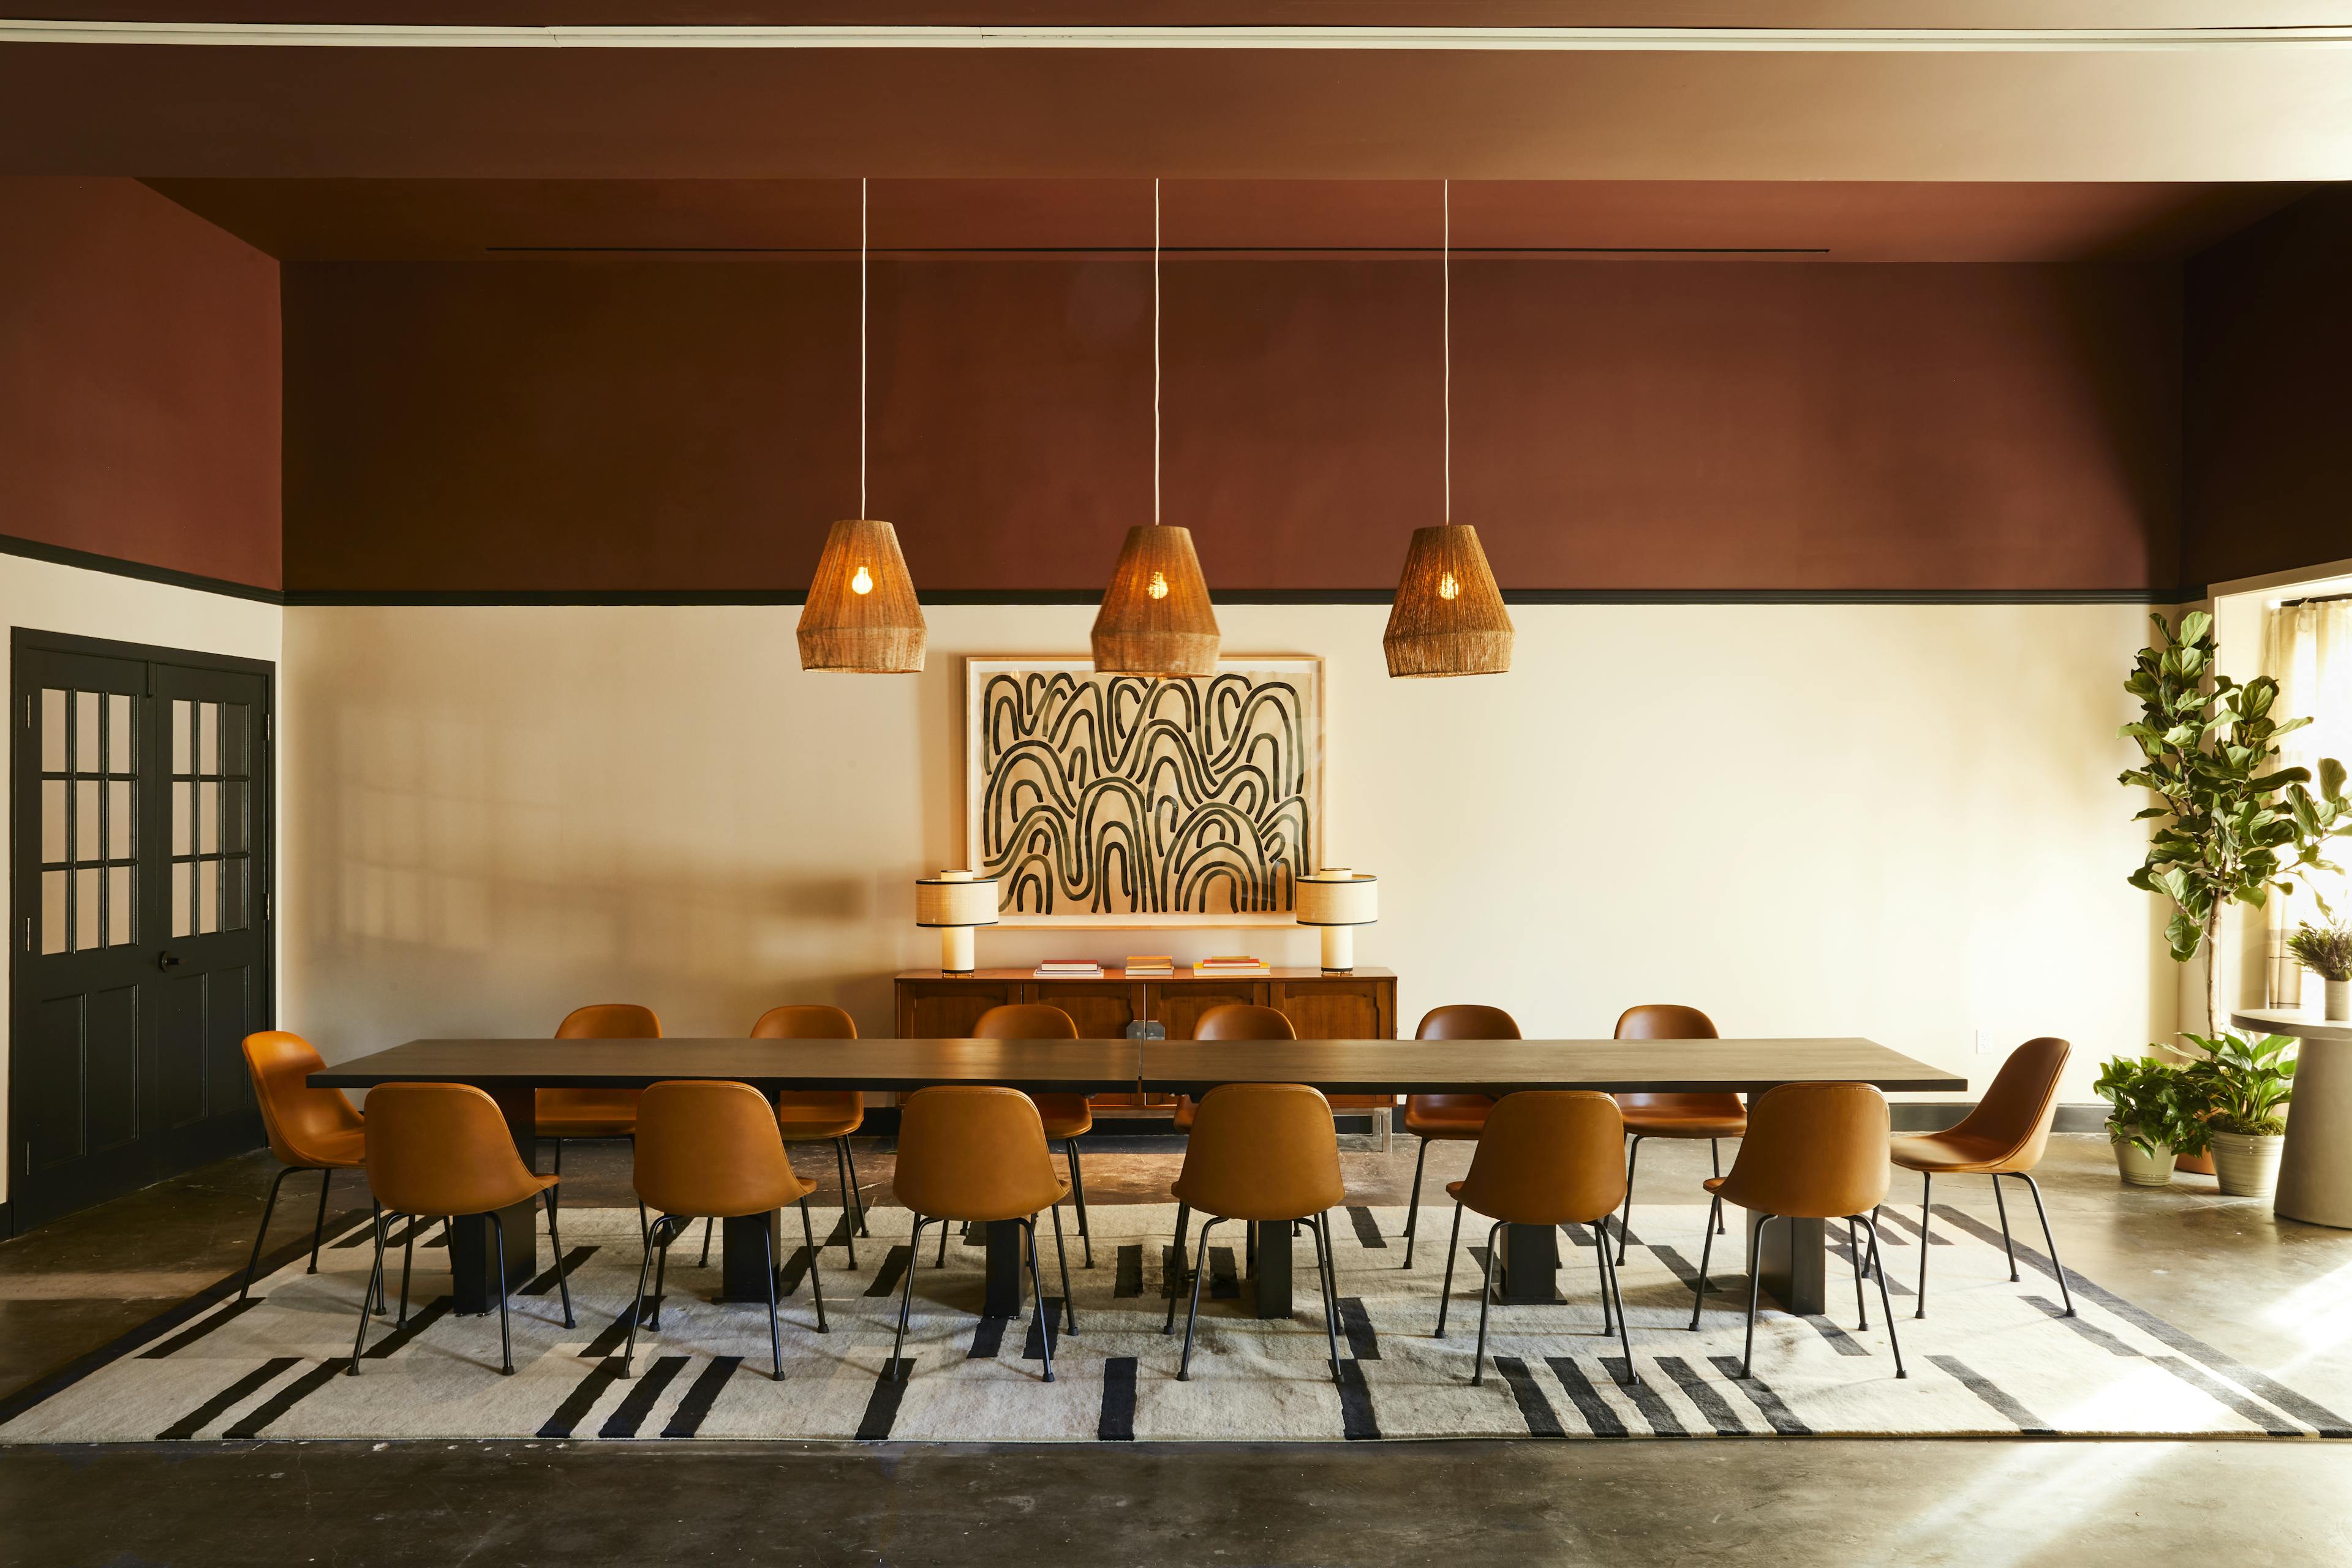 An orange boardroom at the Chief Los Angeles Clubhouse, with a long rectangular table and chairs and an abstract, linear artwork by artist Kate Roebuck installed on a wall.